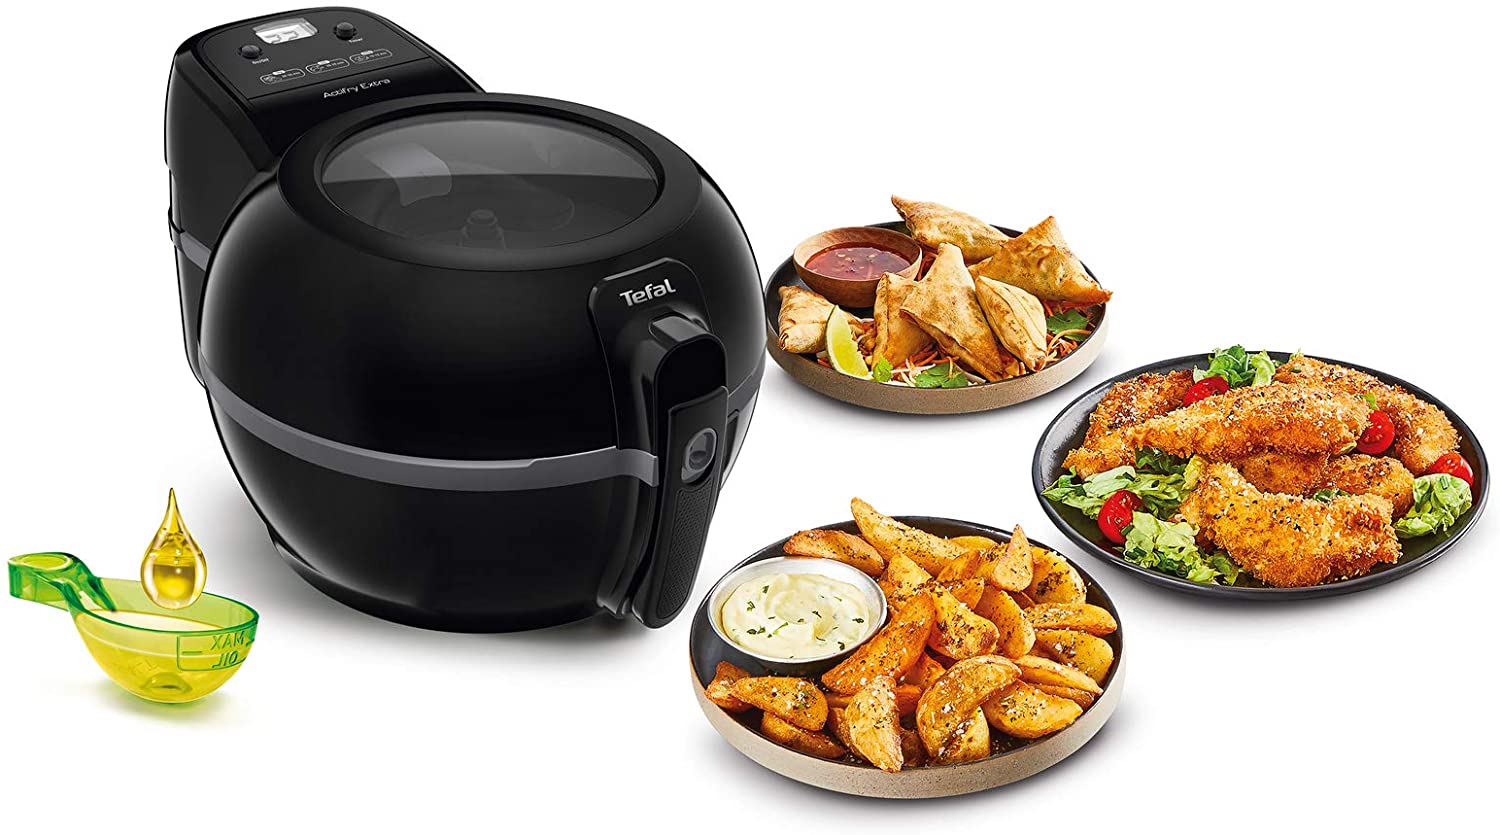 Tefal FZ7228 ActiFry Extra Hot Air Fryer 1550 W Capacity 1.2 kg Mixing Arm System Little to No Oil Required Black